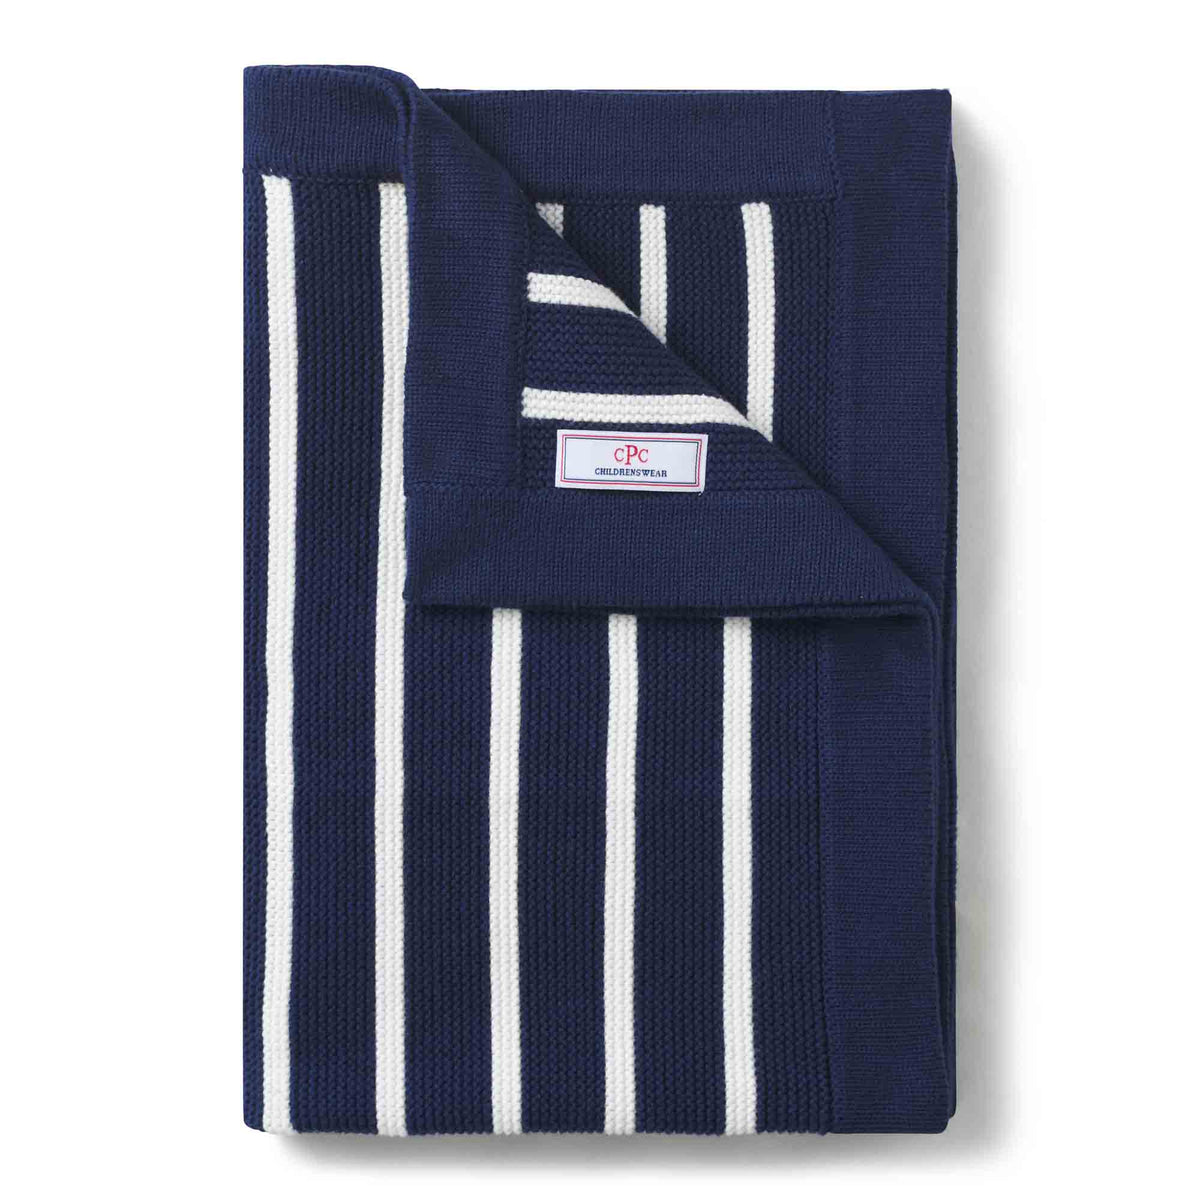 Classic and Preppy Sweater Knit Stroller Blanket, Medieval Blue Marvin Stripe-Accessory-Medieval Blue-One-Size-CPC - Classic Prep Childrenswear